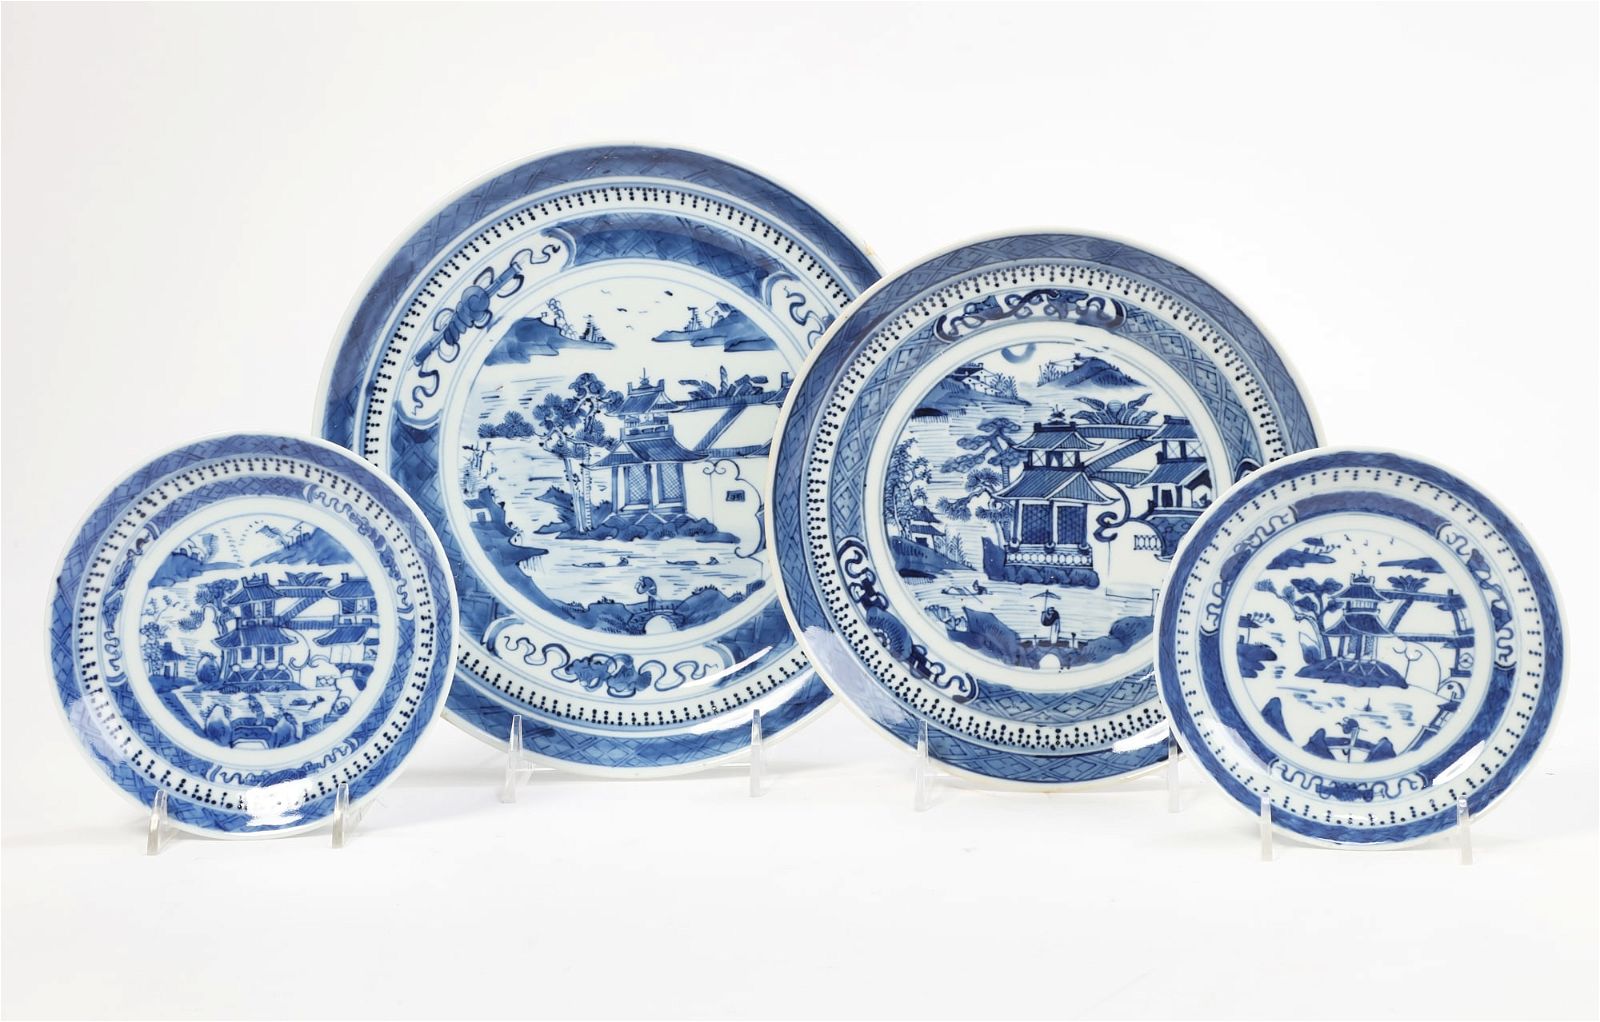 FOUR CHINESE EXPORT PORCELAIN DISHESFour